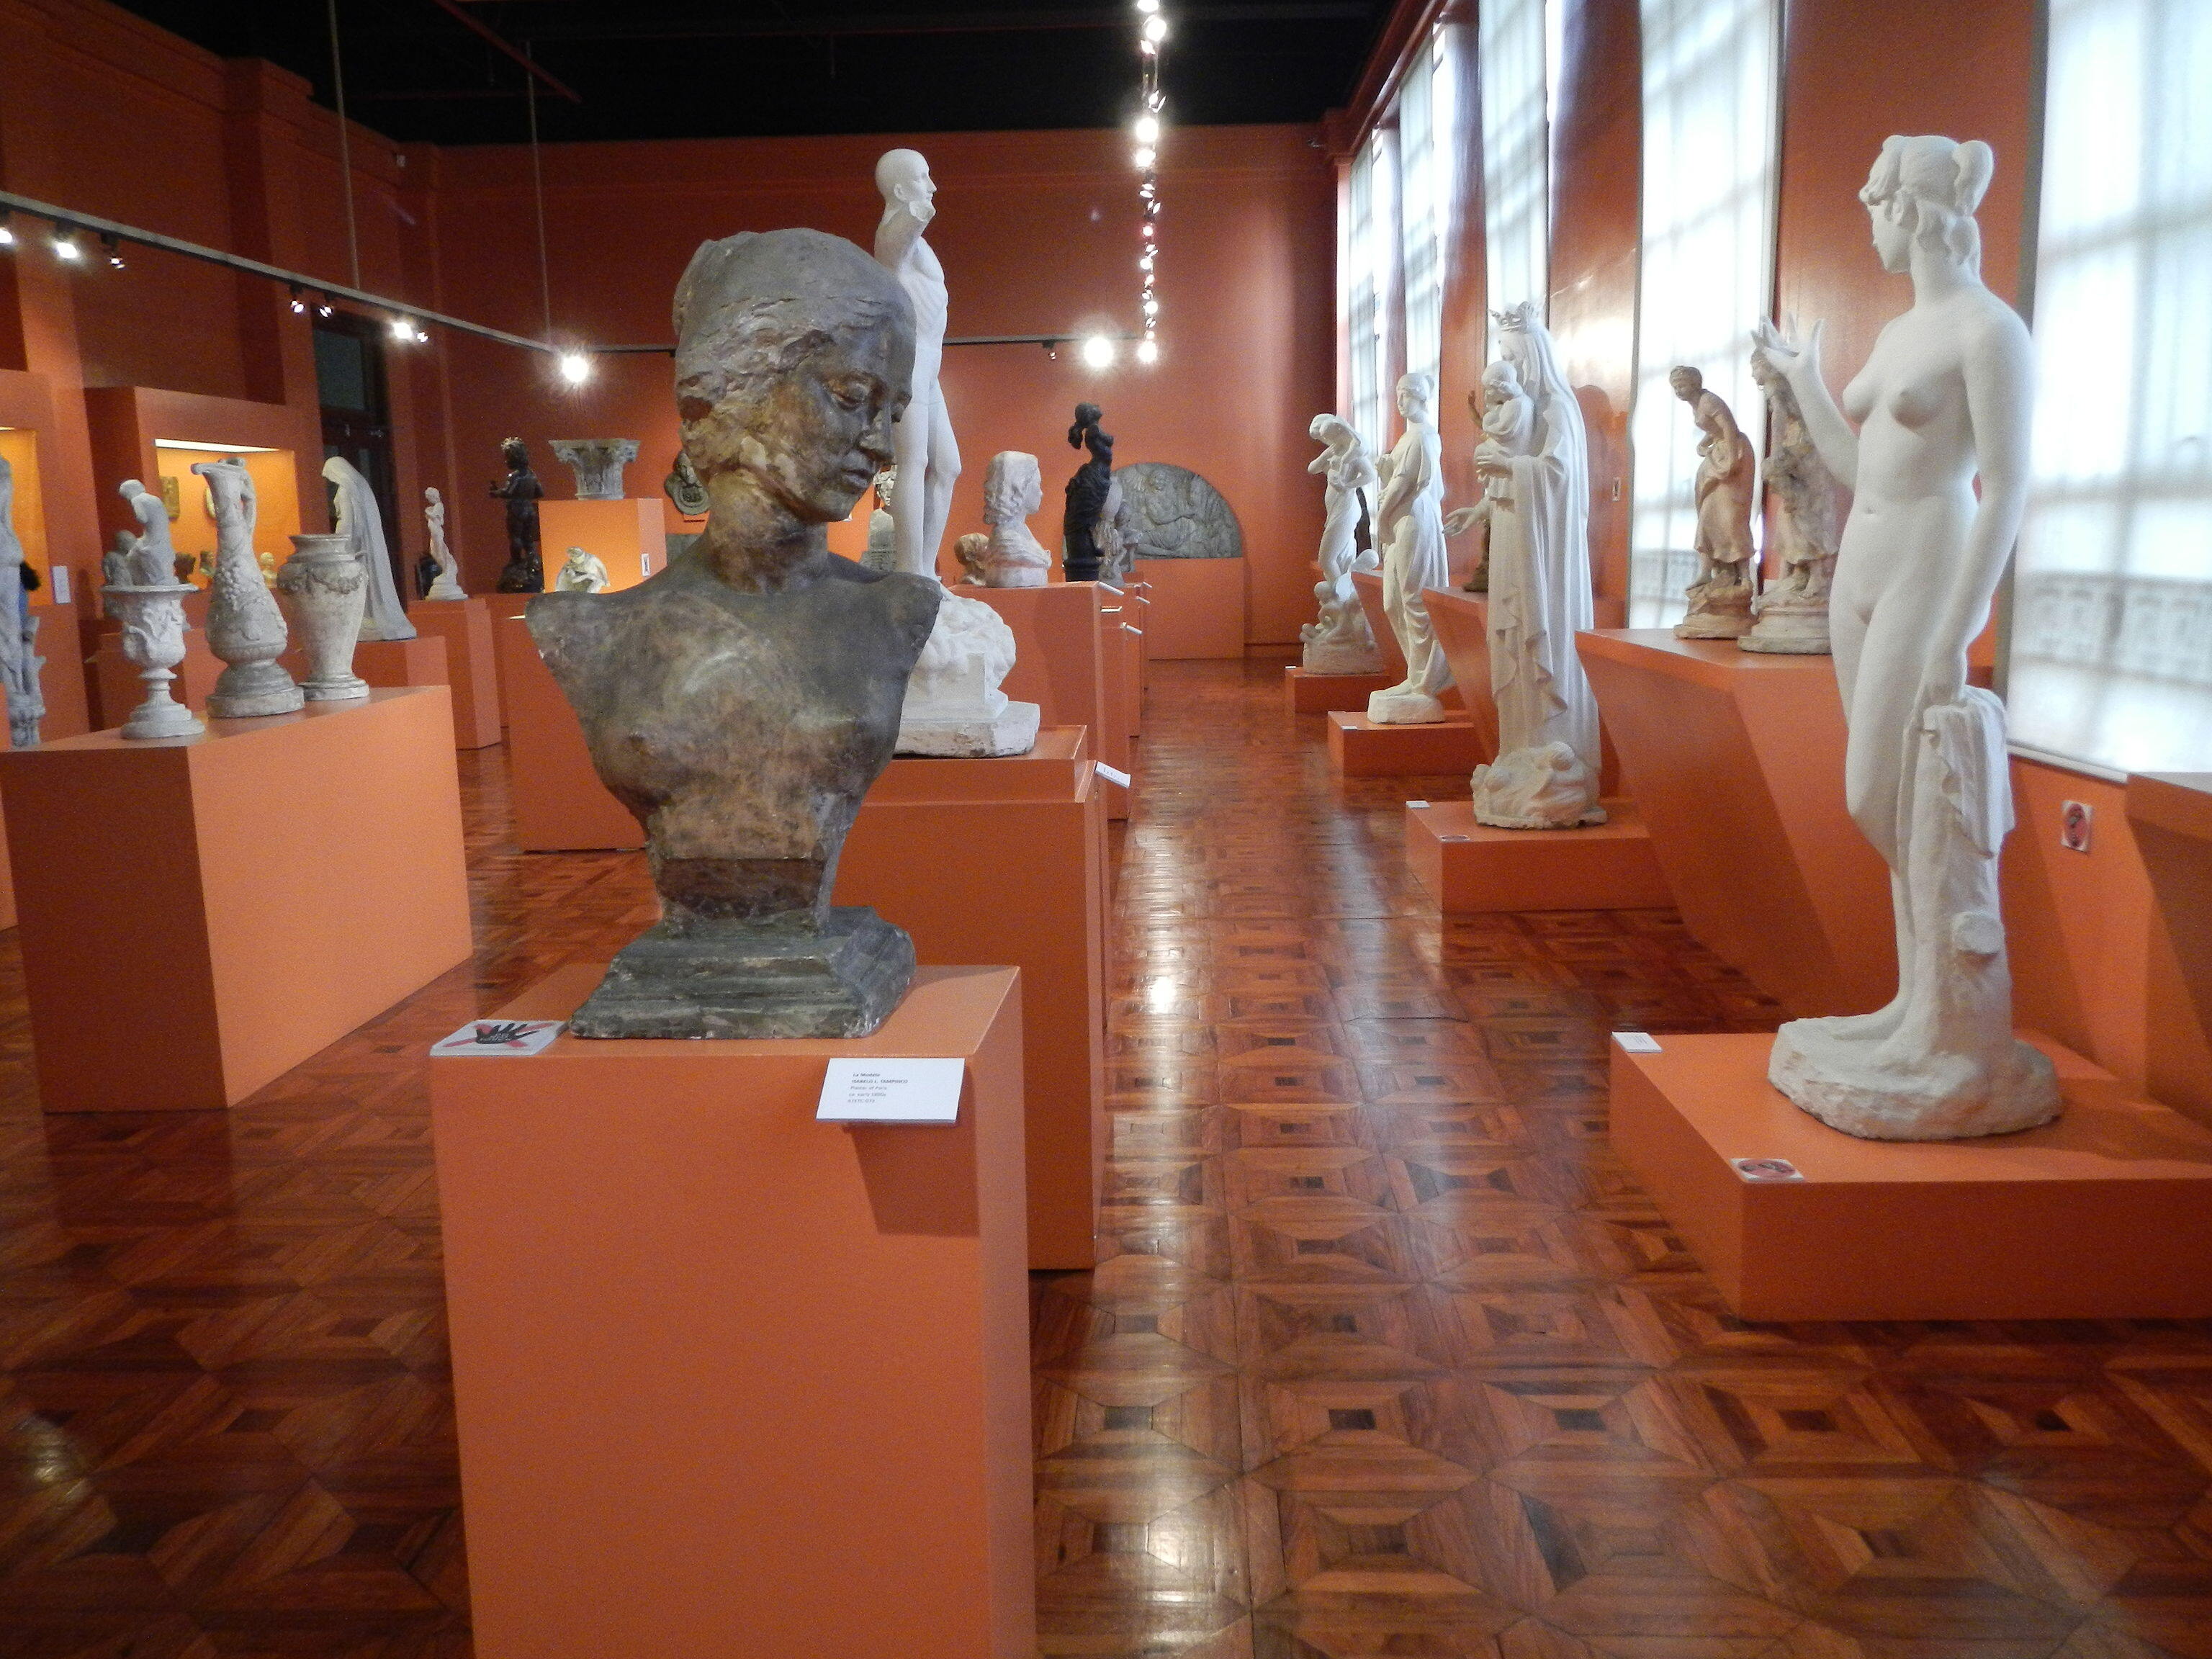 Photos of the National Art Gallery of the National Museum of the Philippines[1][2] the Old Congress Building, Manila, the galleries ground floor of paintings, reliefs and sculptures, inter alia.